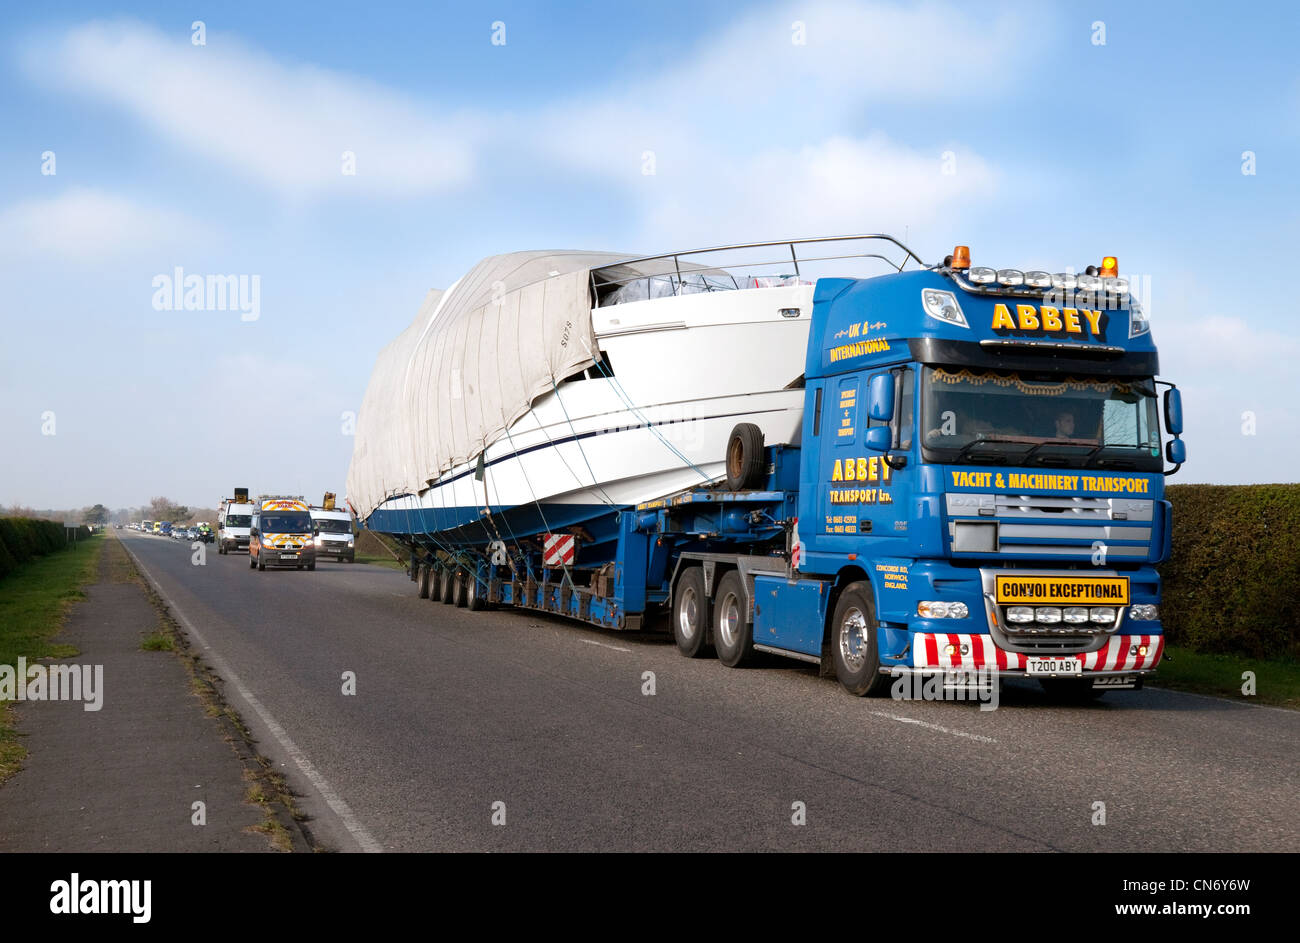 A large boat being transported by road on a transporter lorry, Suffolk UK Stock Photo